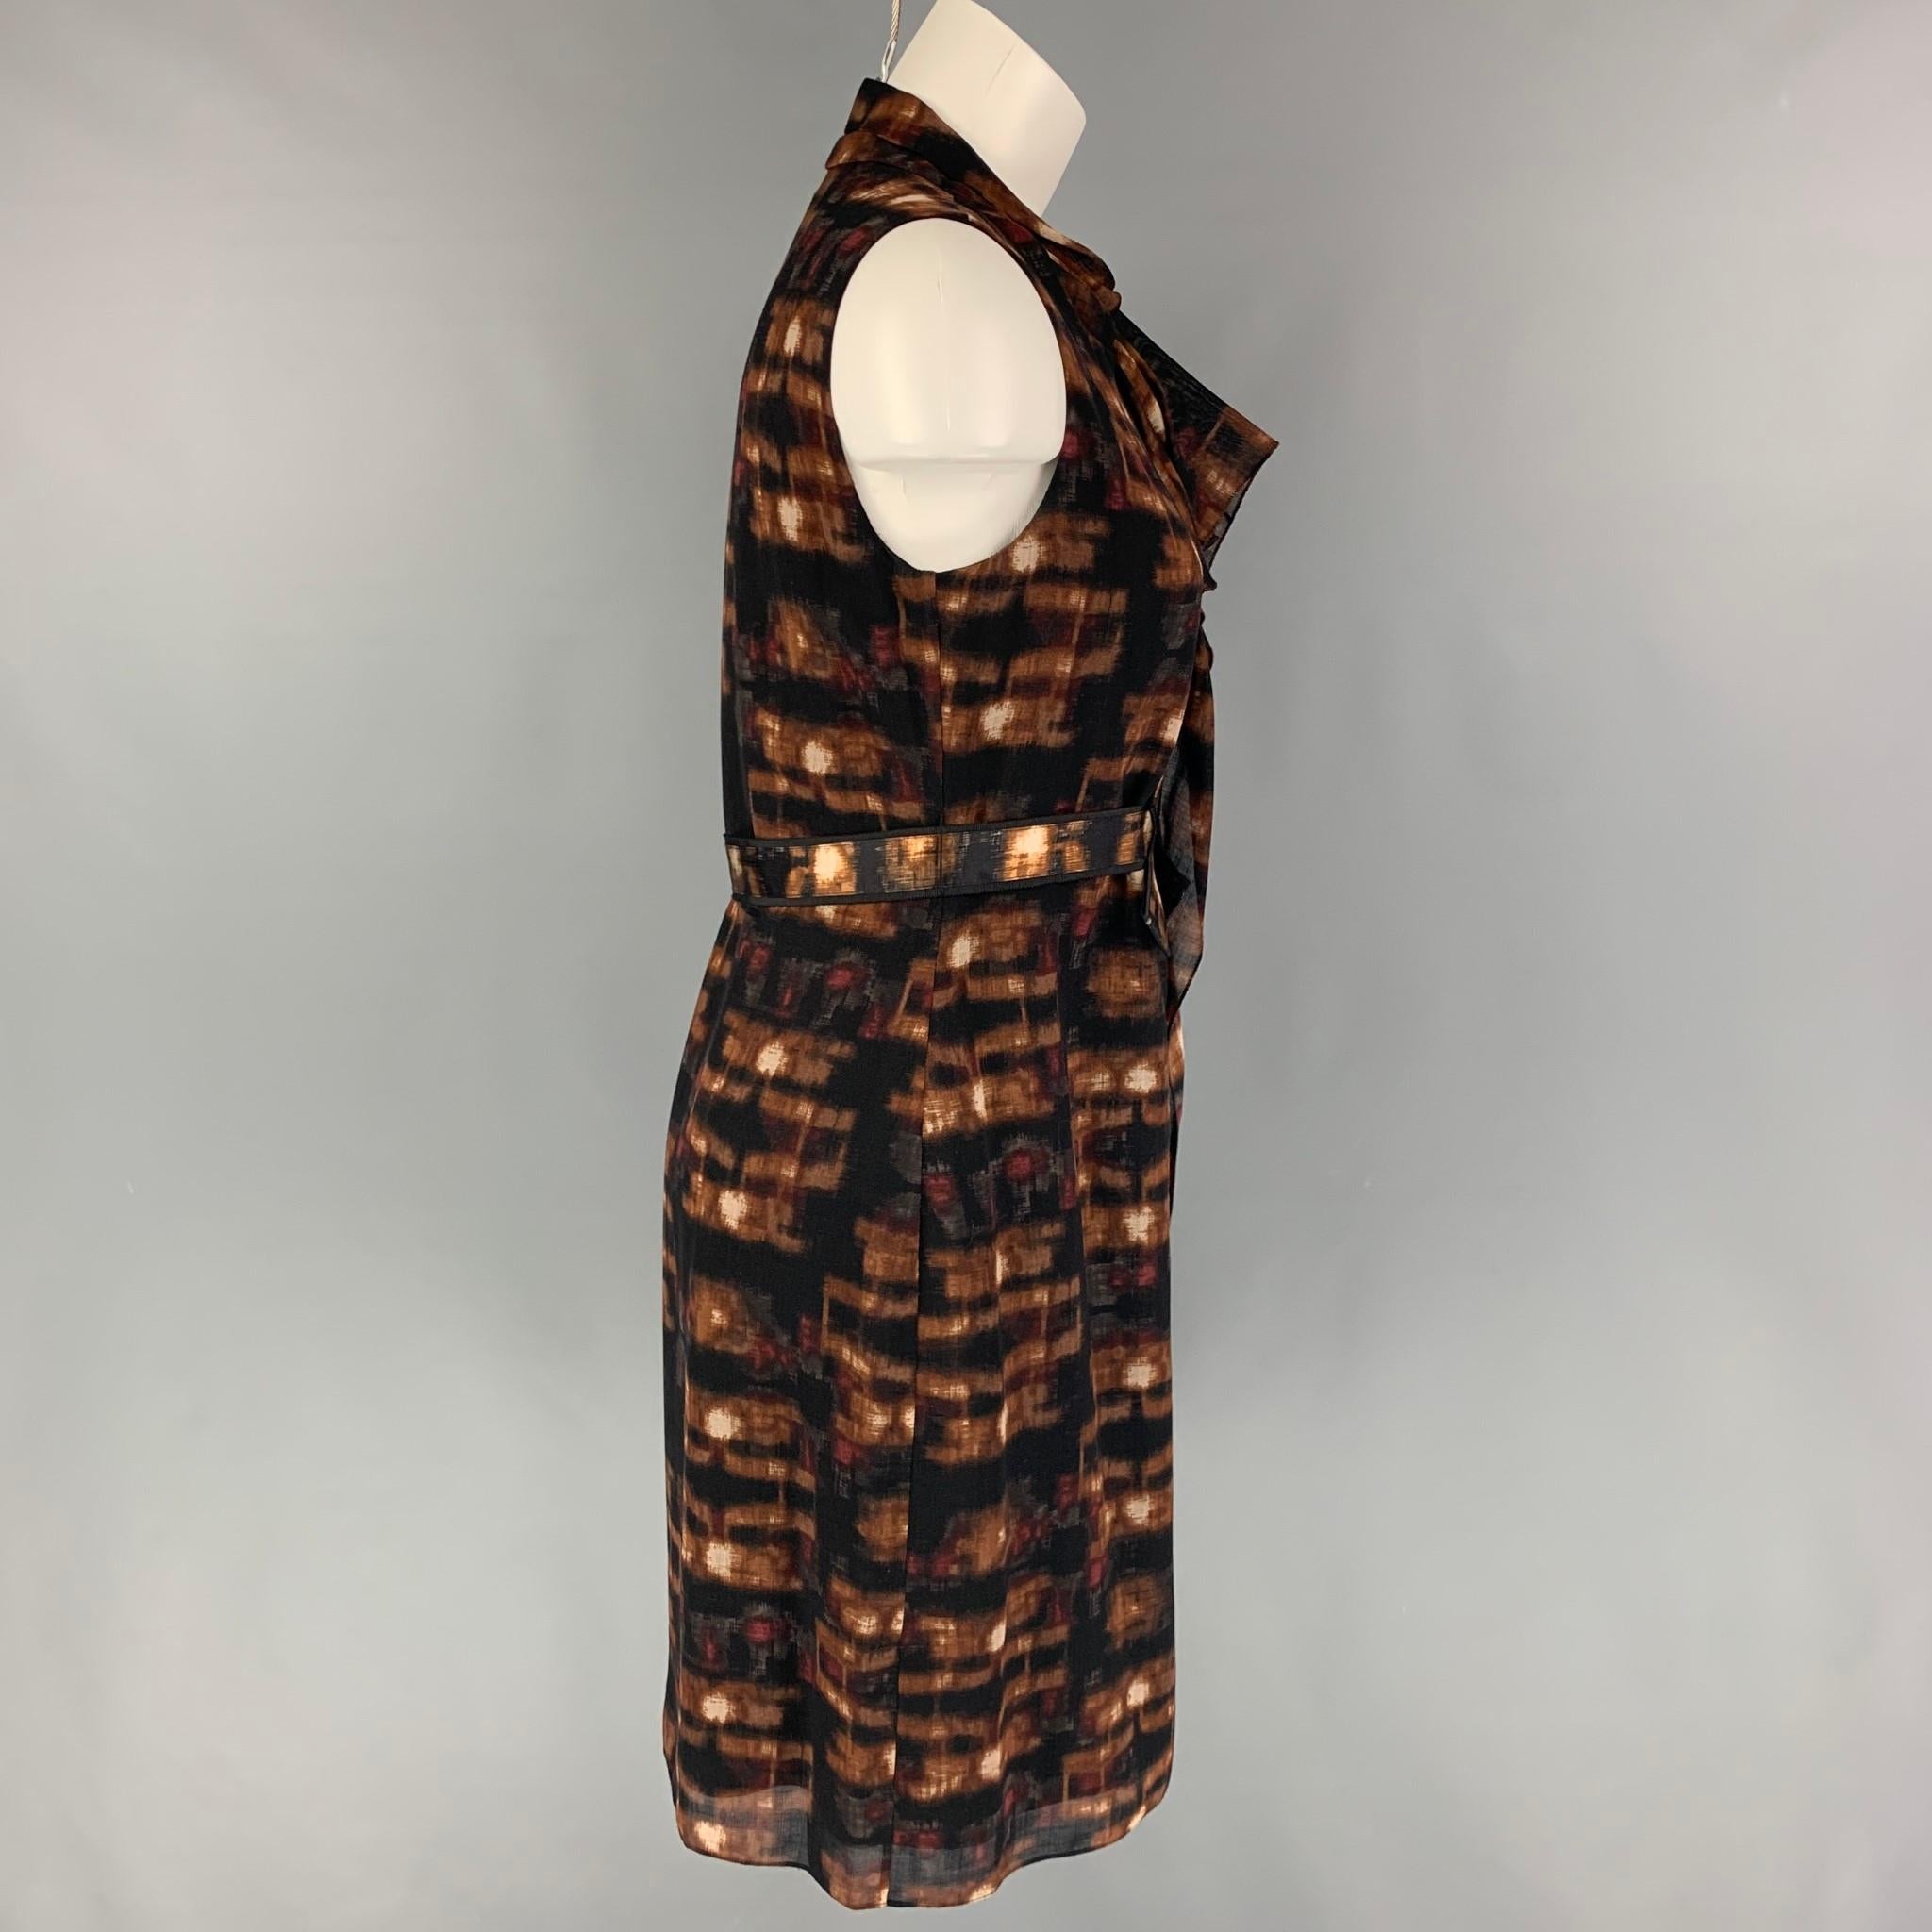 ELIE TAHARI dress comes in a brown & black marbled nylon featuring a sheath style, ruffled, belt detail, sleeveless, and a front zip up closure. 

Very Good Pre-Owned Condition.
Marked: 6

Measurements:

Shoulder: 14 in.
Bust: 34 in.
Waist: 30